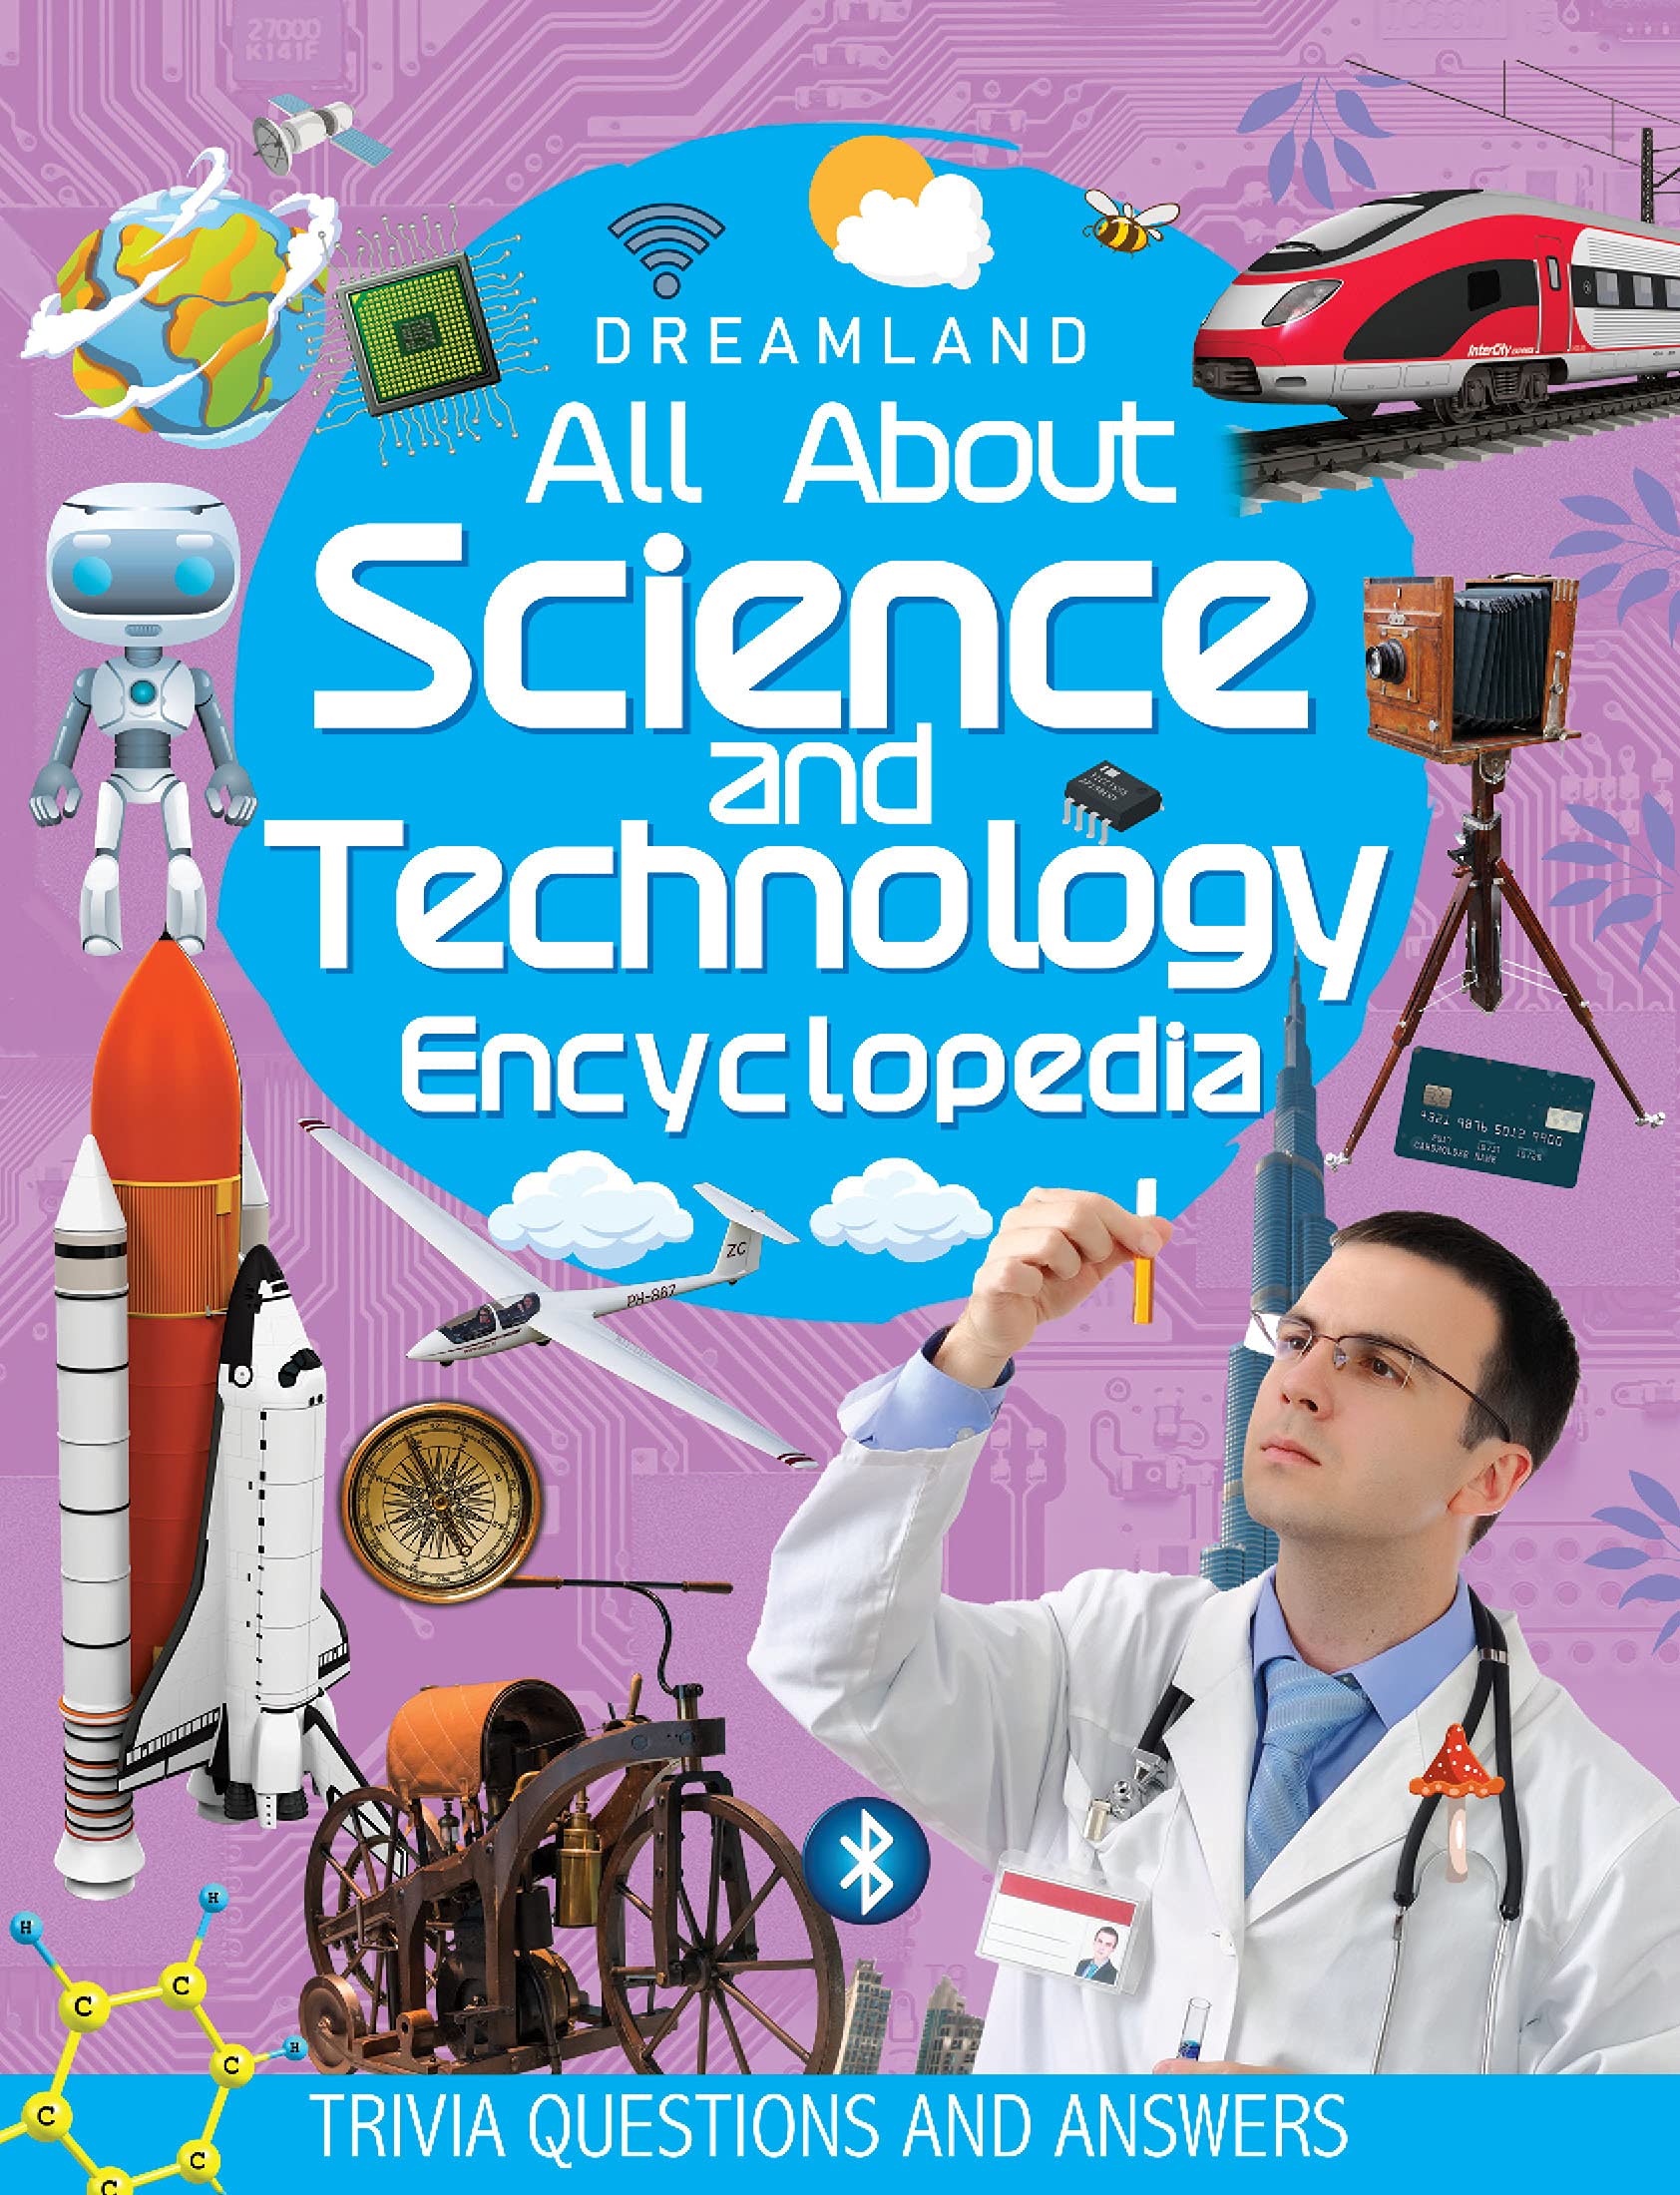 All About Science and Technology Encyclopedia for Children Age 5 - 15 Years